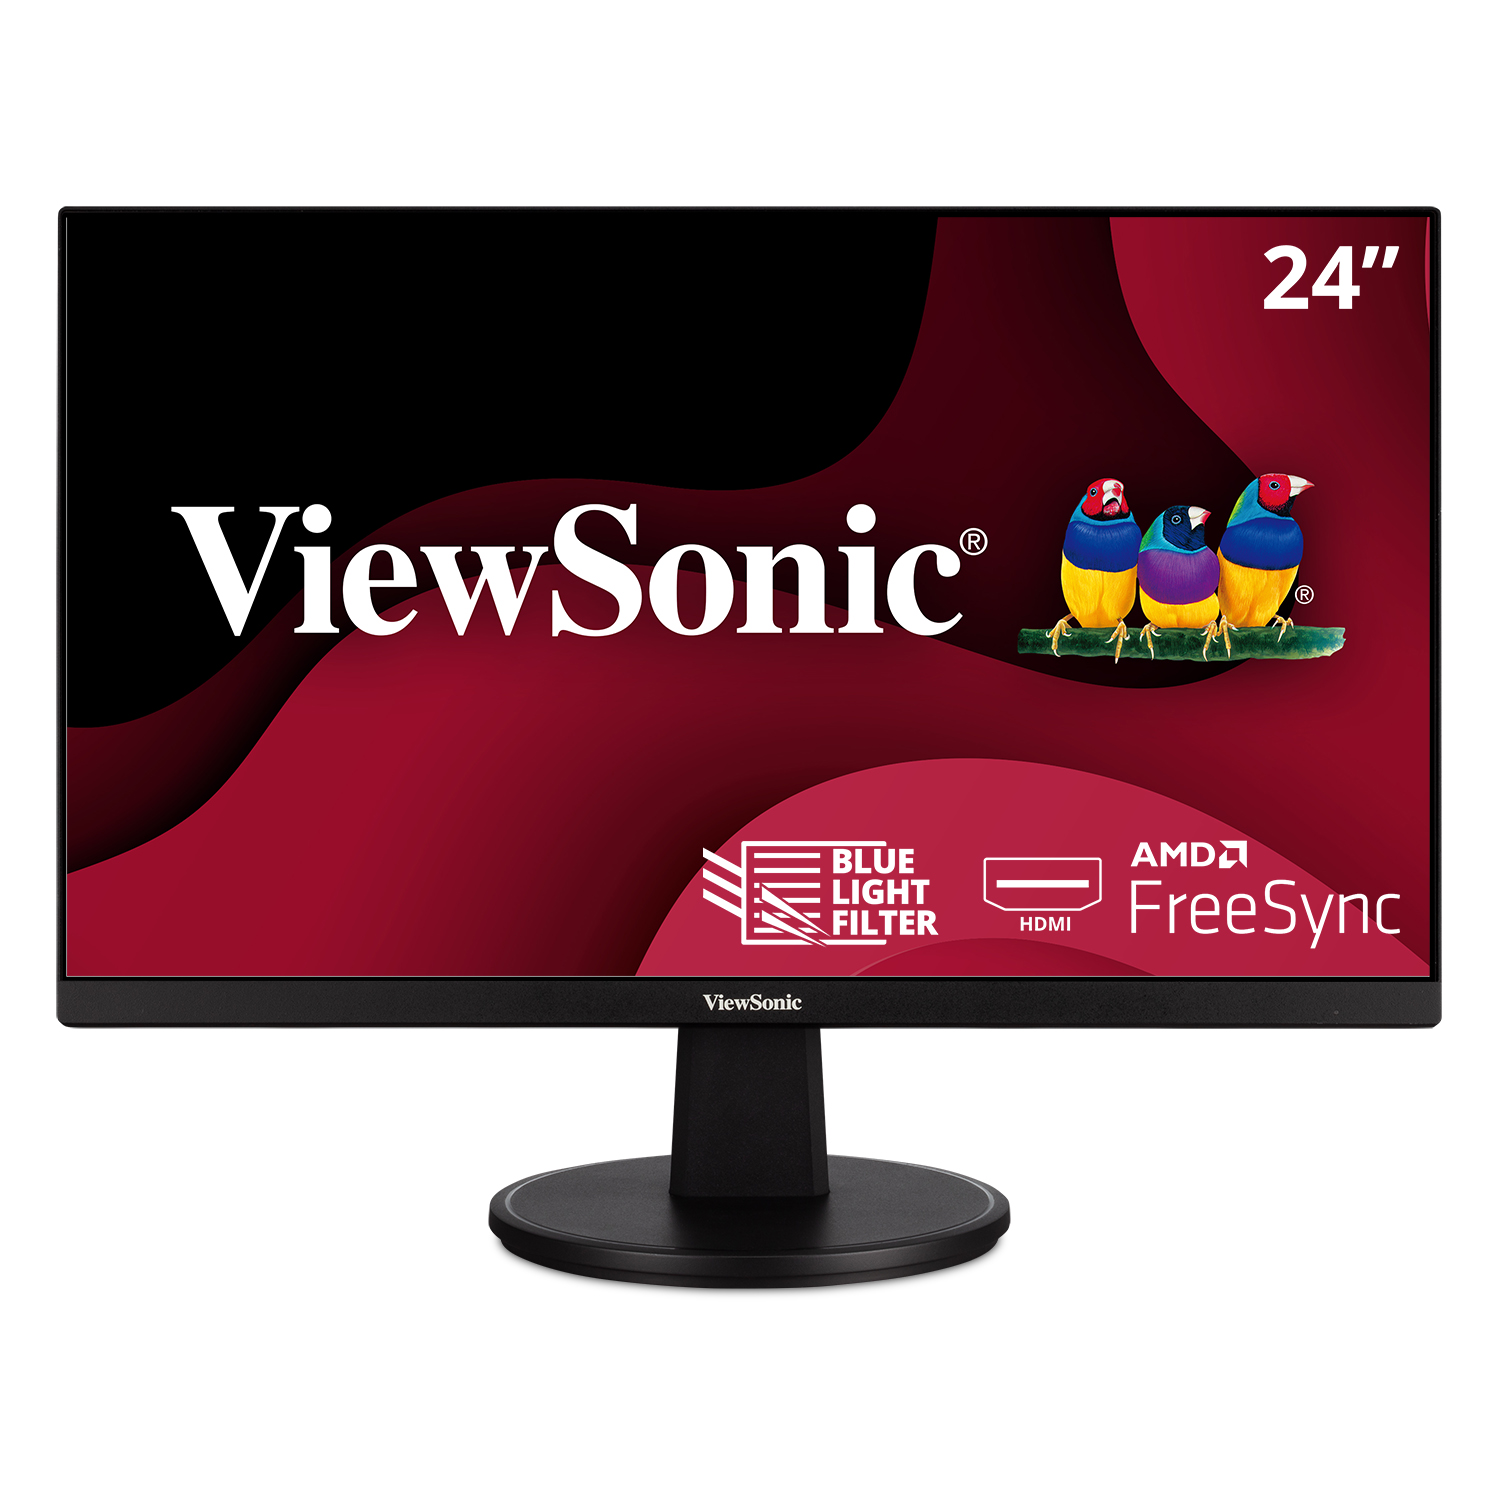 ViewSonic VA2447-MH 24 Inch Full HD 1080p Monitor with Ultra-Thin Bezel, AMD FreeSync, 100Hz, Eye Care, and HDMI, VGA Inputs for Home and Office - image 1 of 8